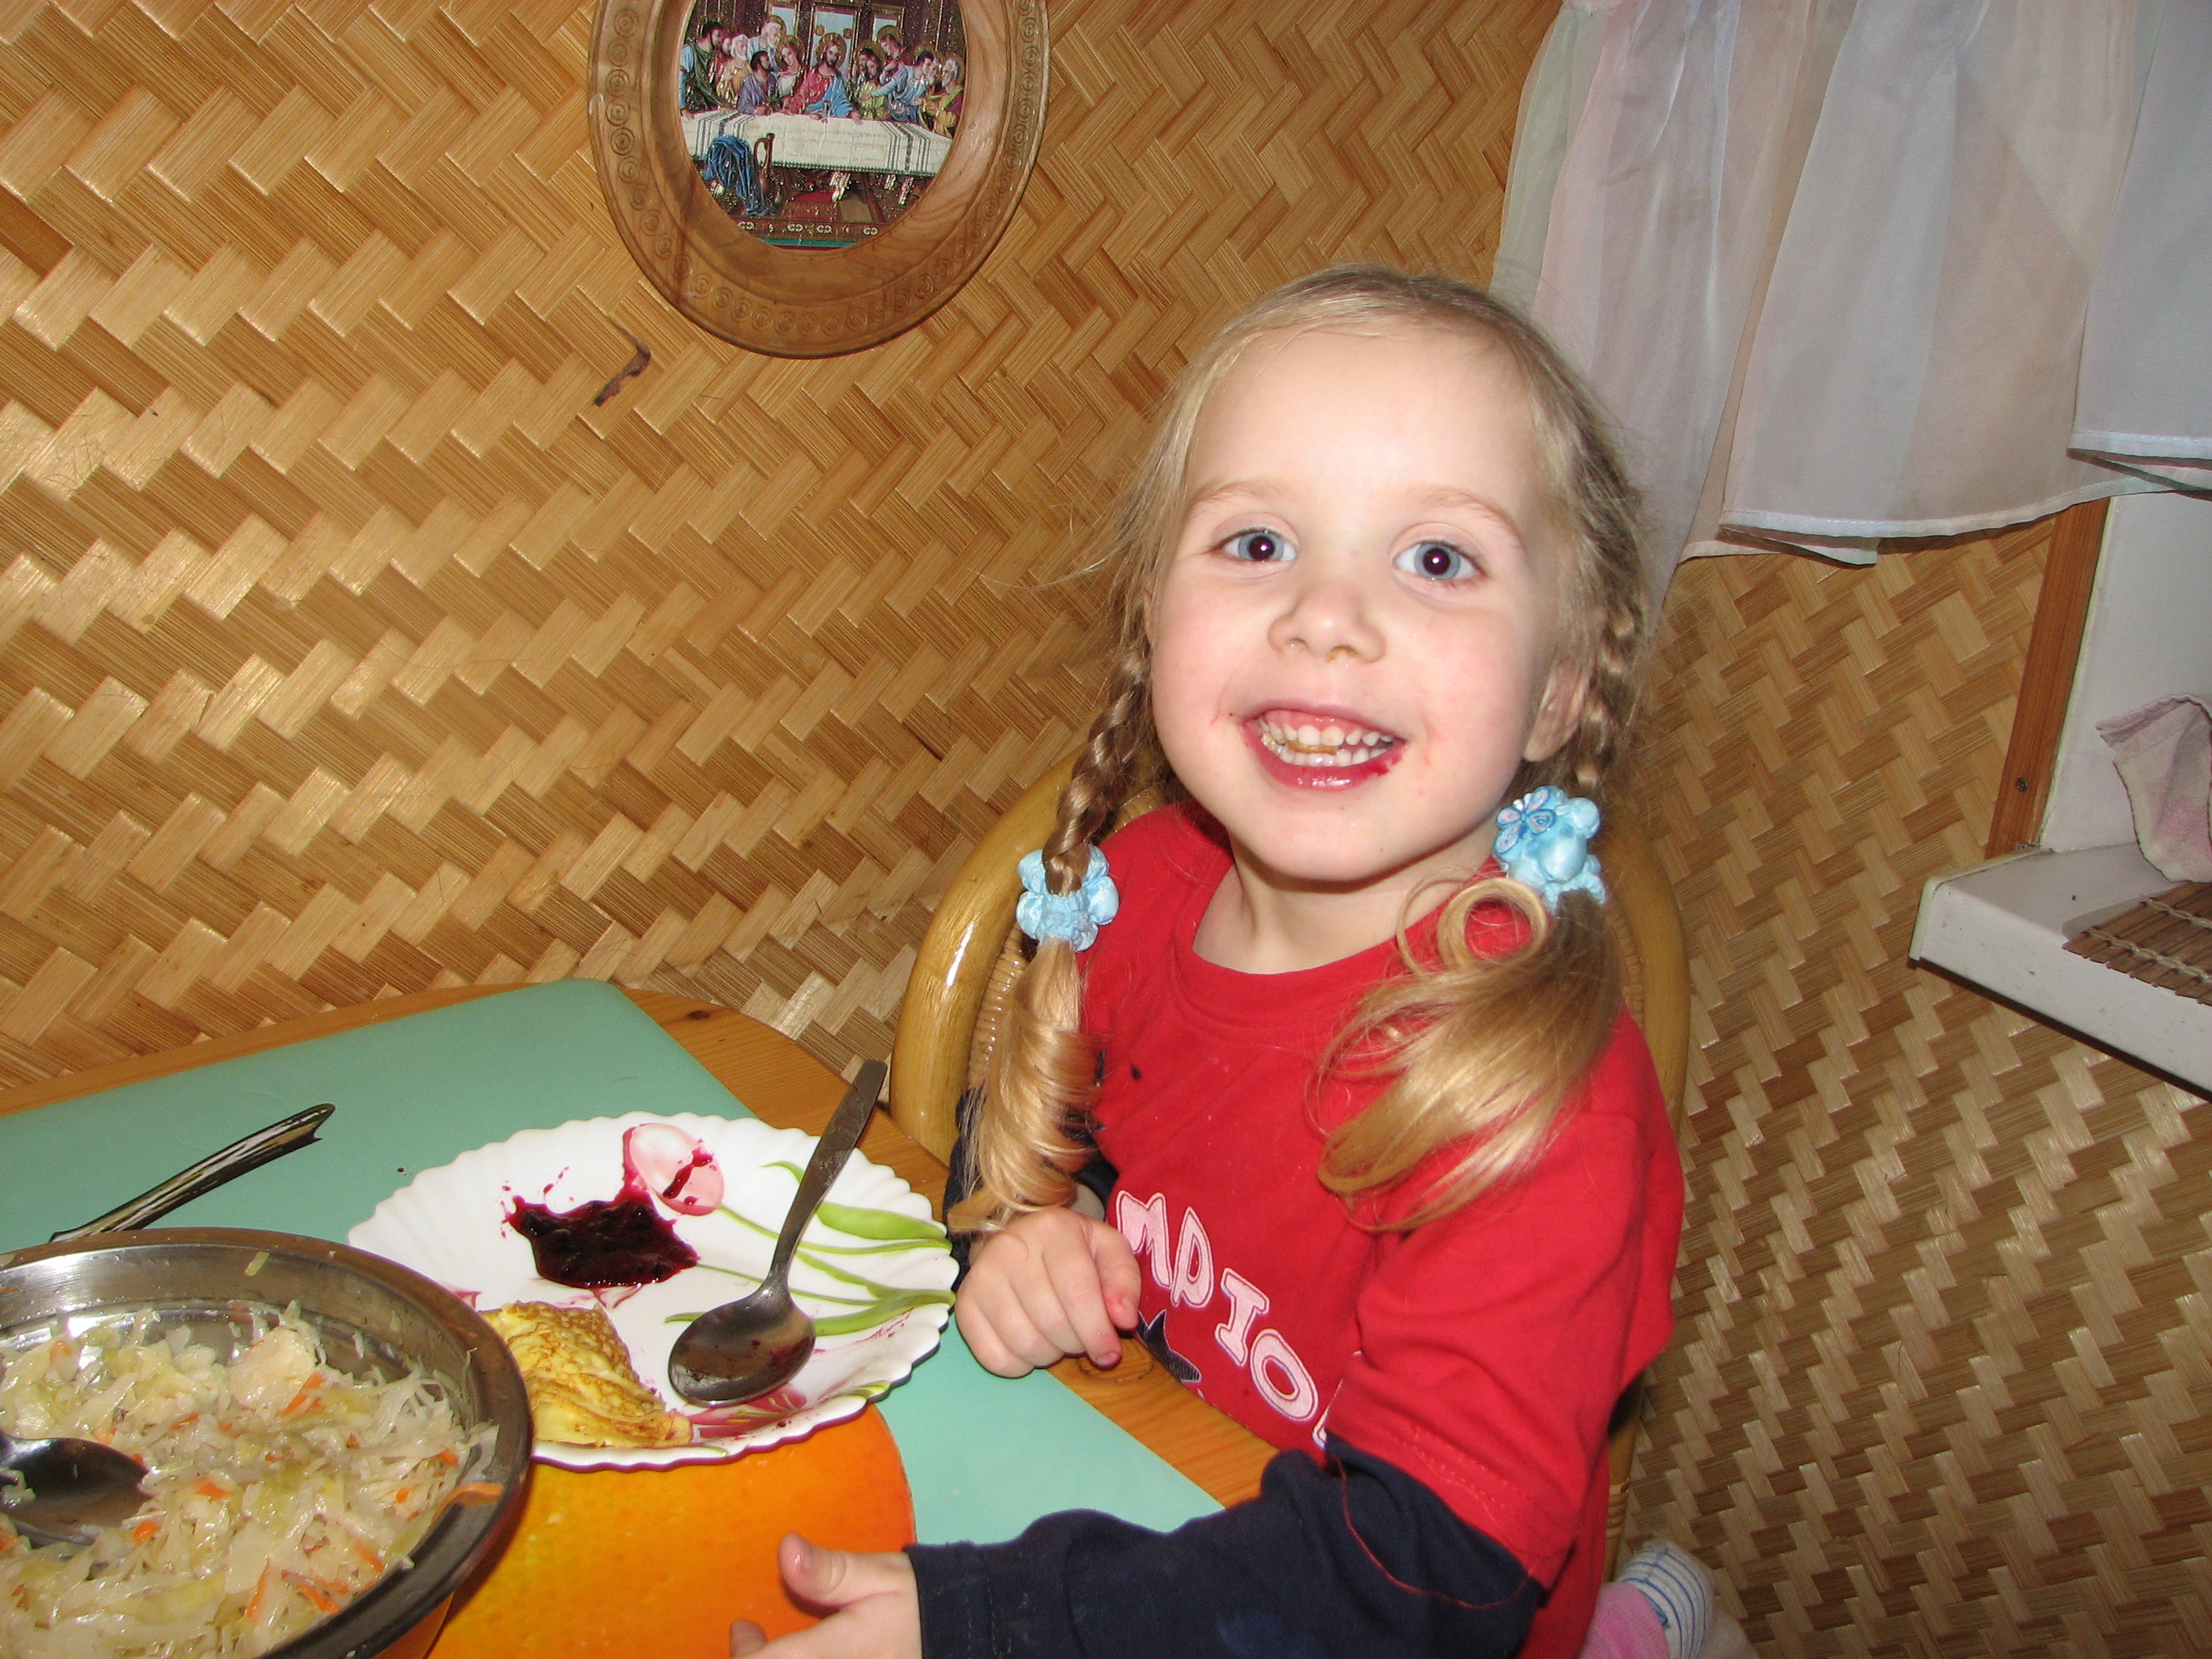 A small girl eating at a table